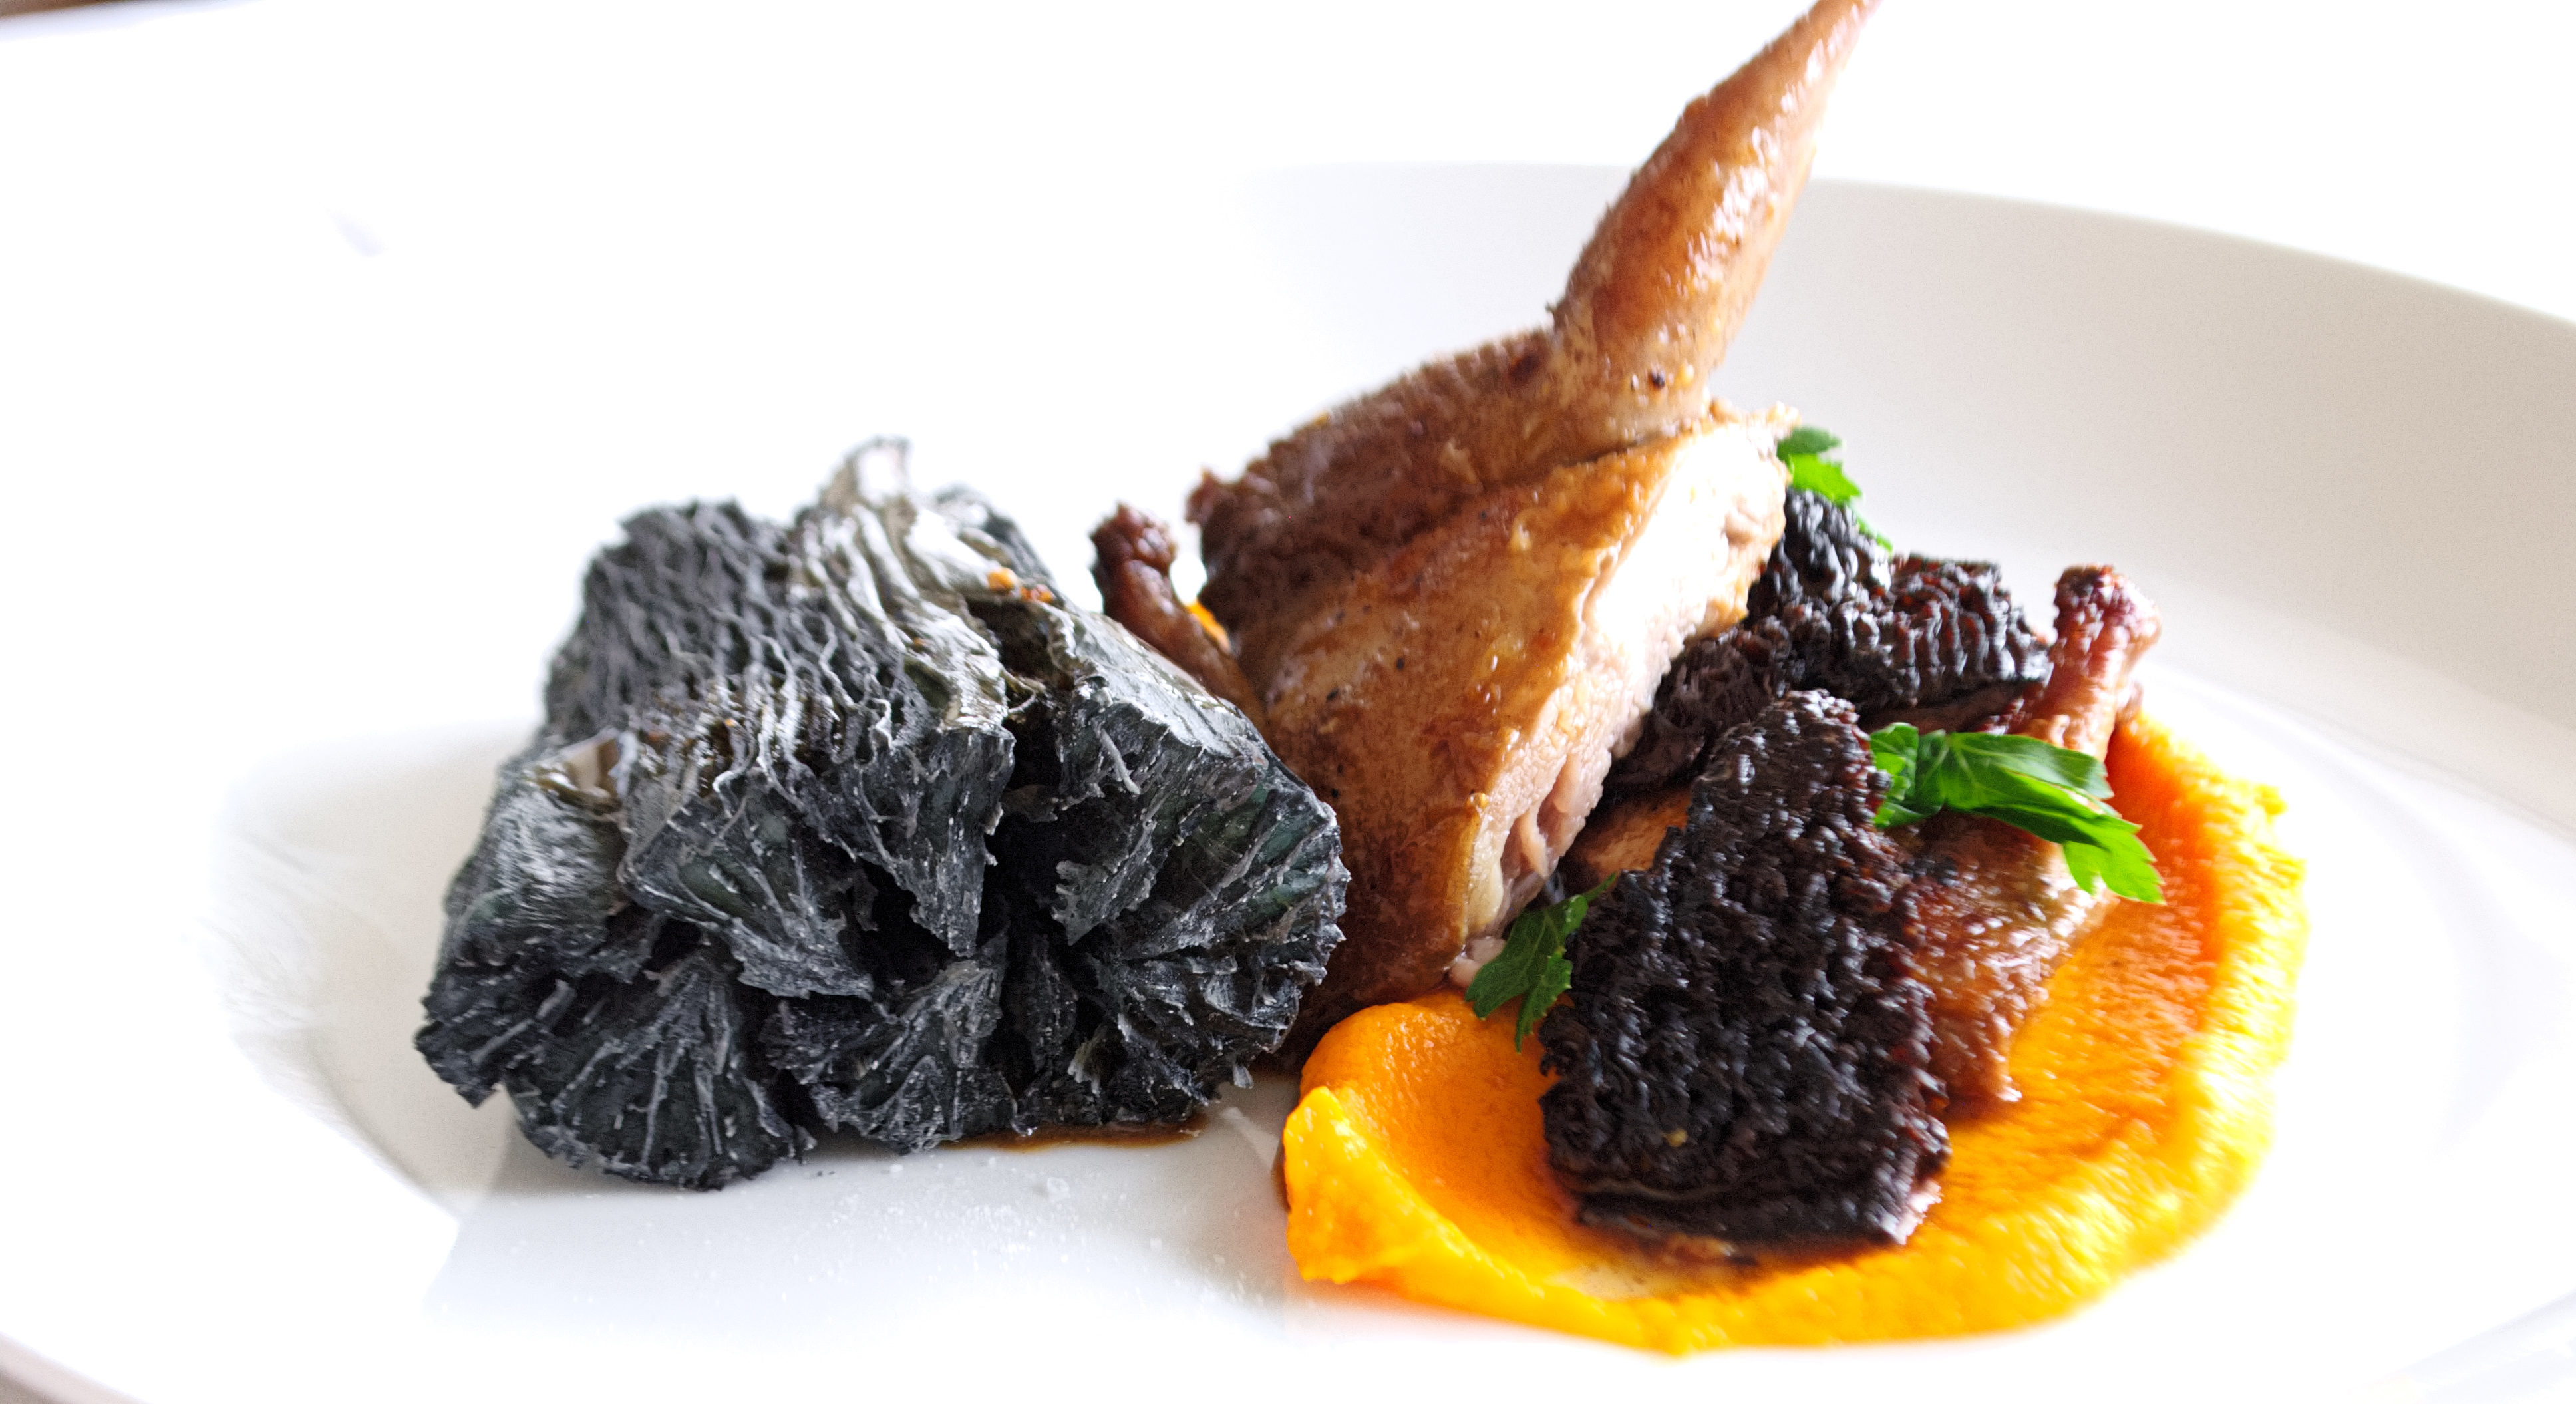 Travel Noire Eats And Recipes: Quail With Cassava And Carrot Purée